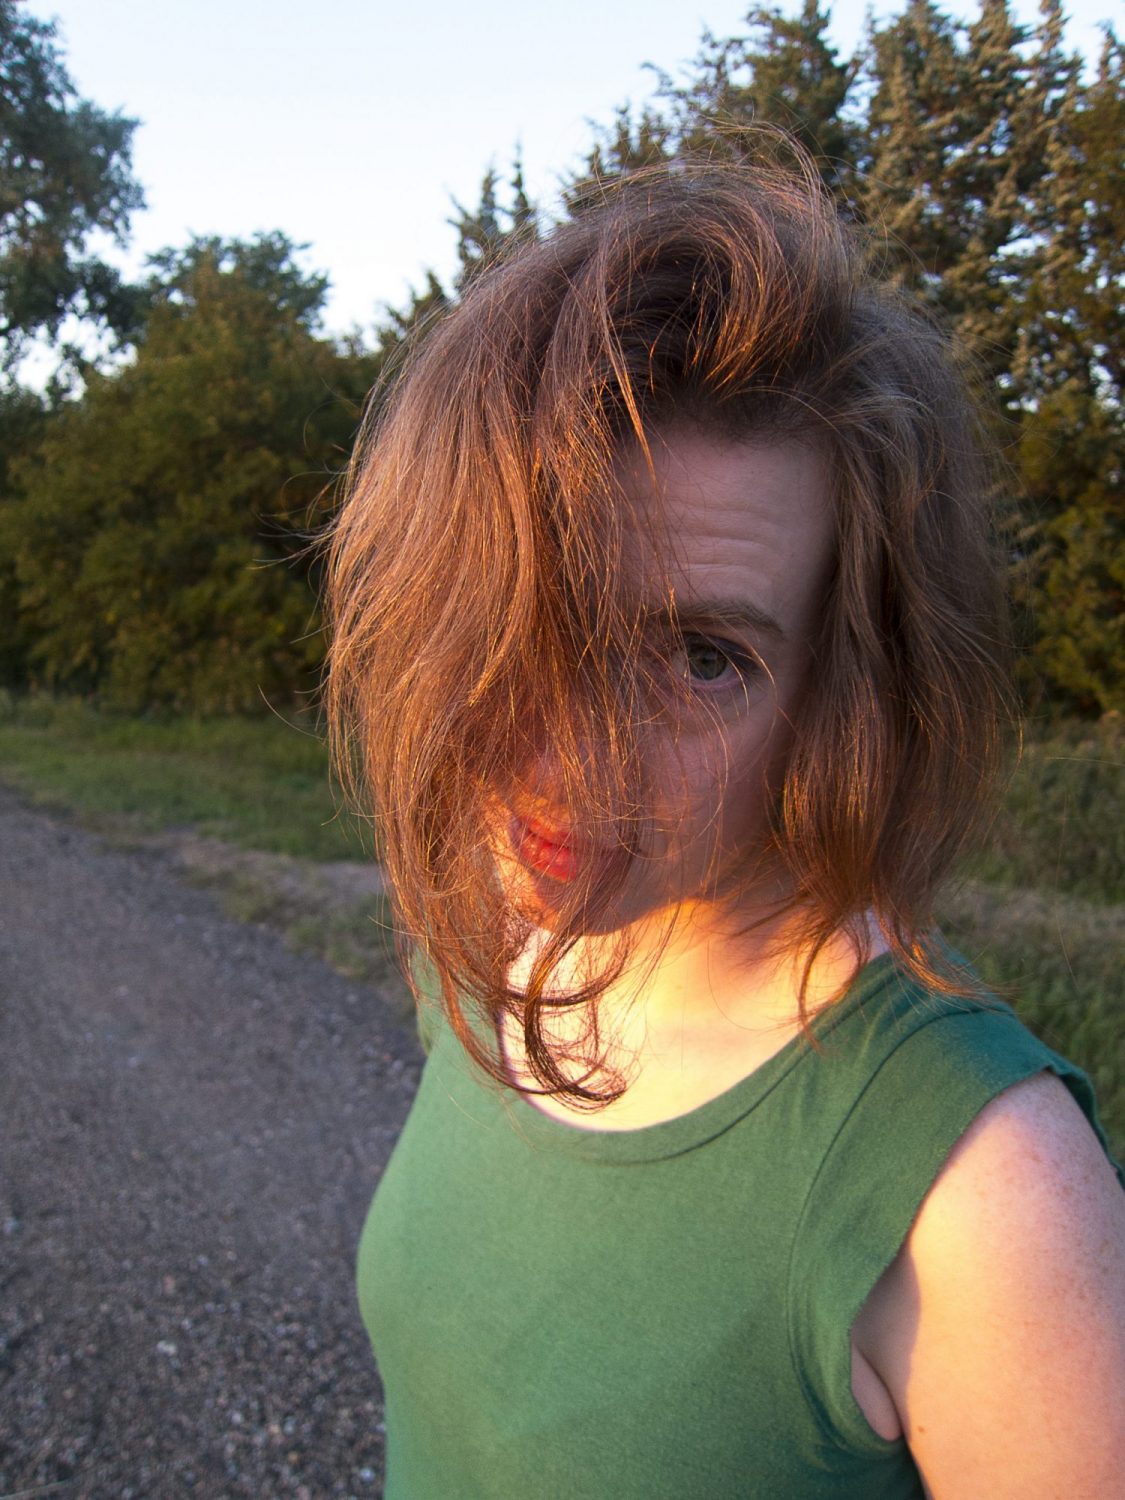 Mary on Gravel Road Putting Hair in Light to Make it Look More Red